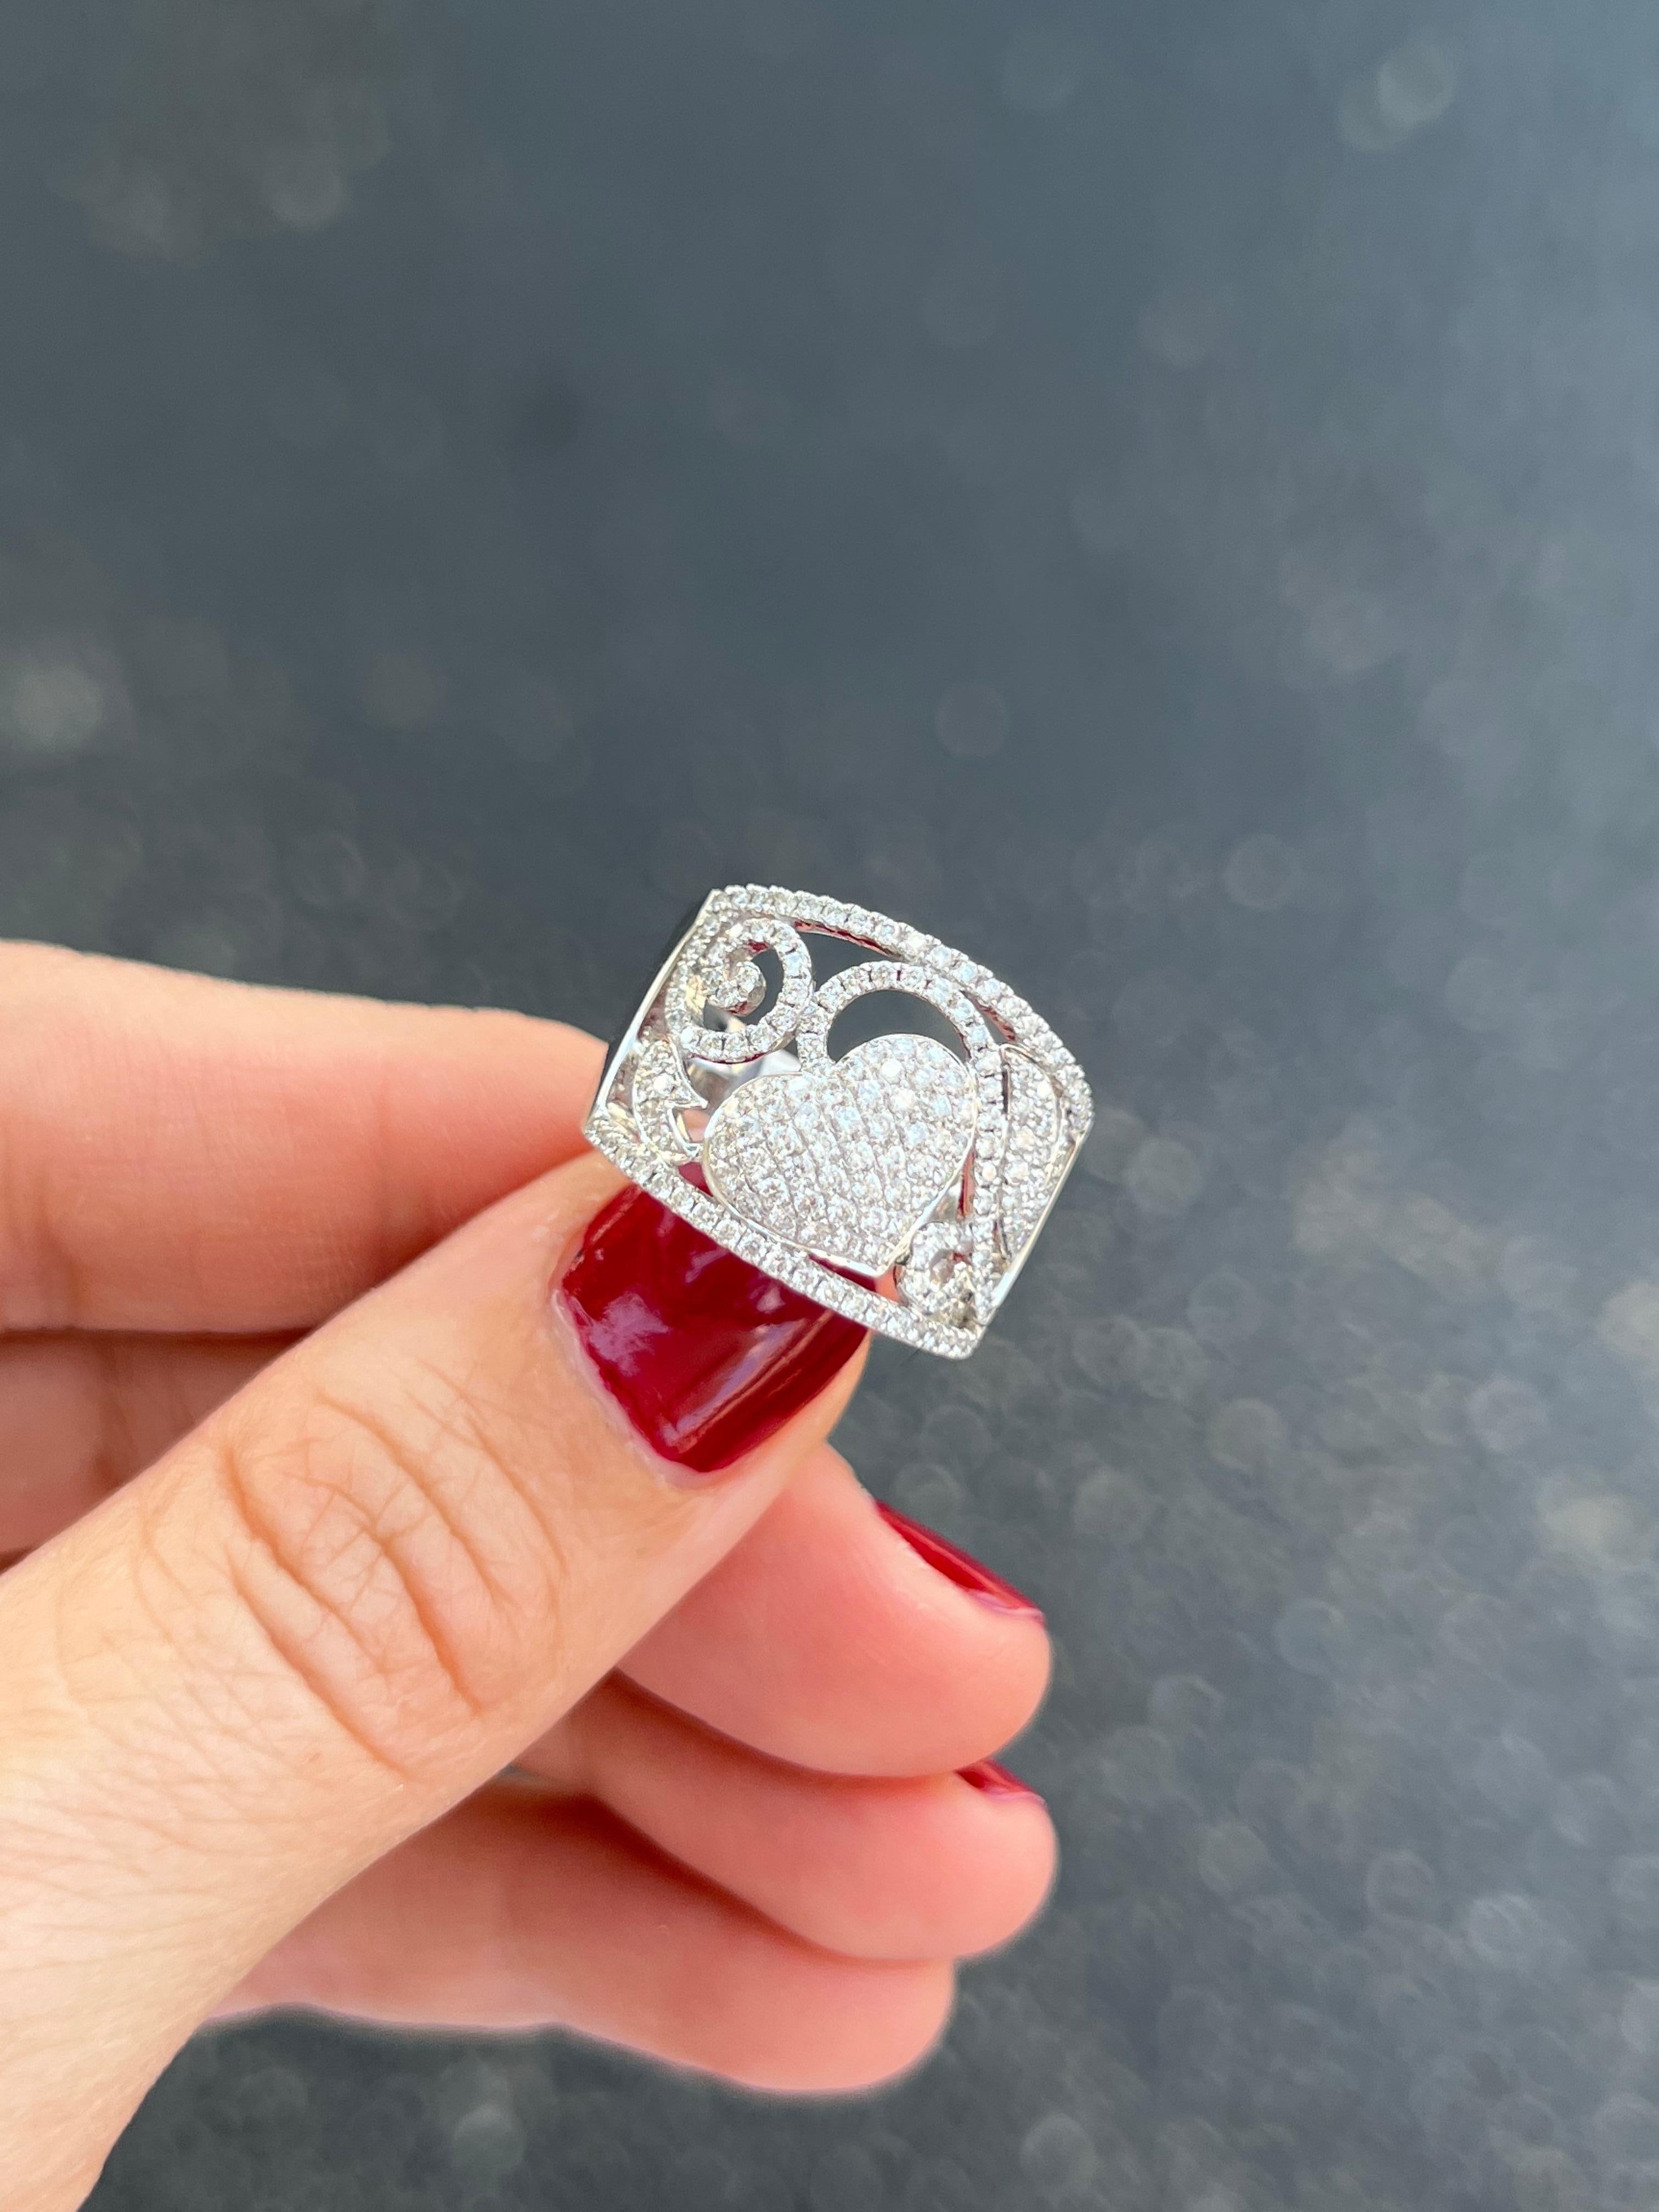 14k white gold diamond pave ring with hearts and vines.

Features
14K white gold
1.01 carat diamonds
Ring size 6.5, can be sized